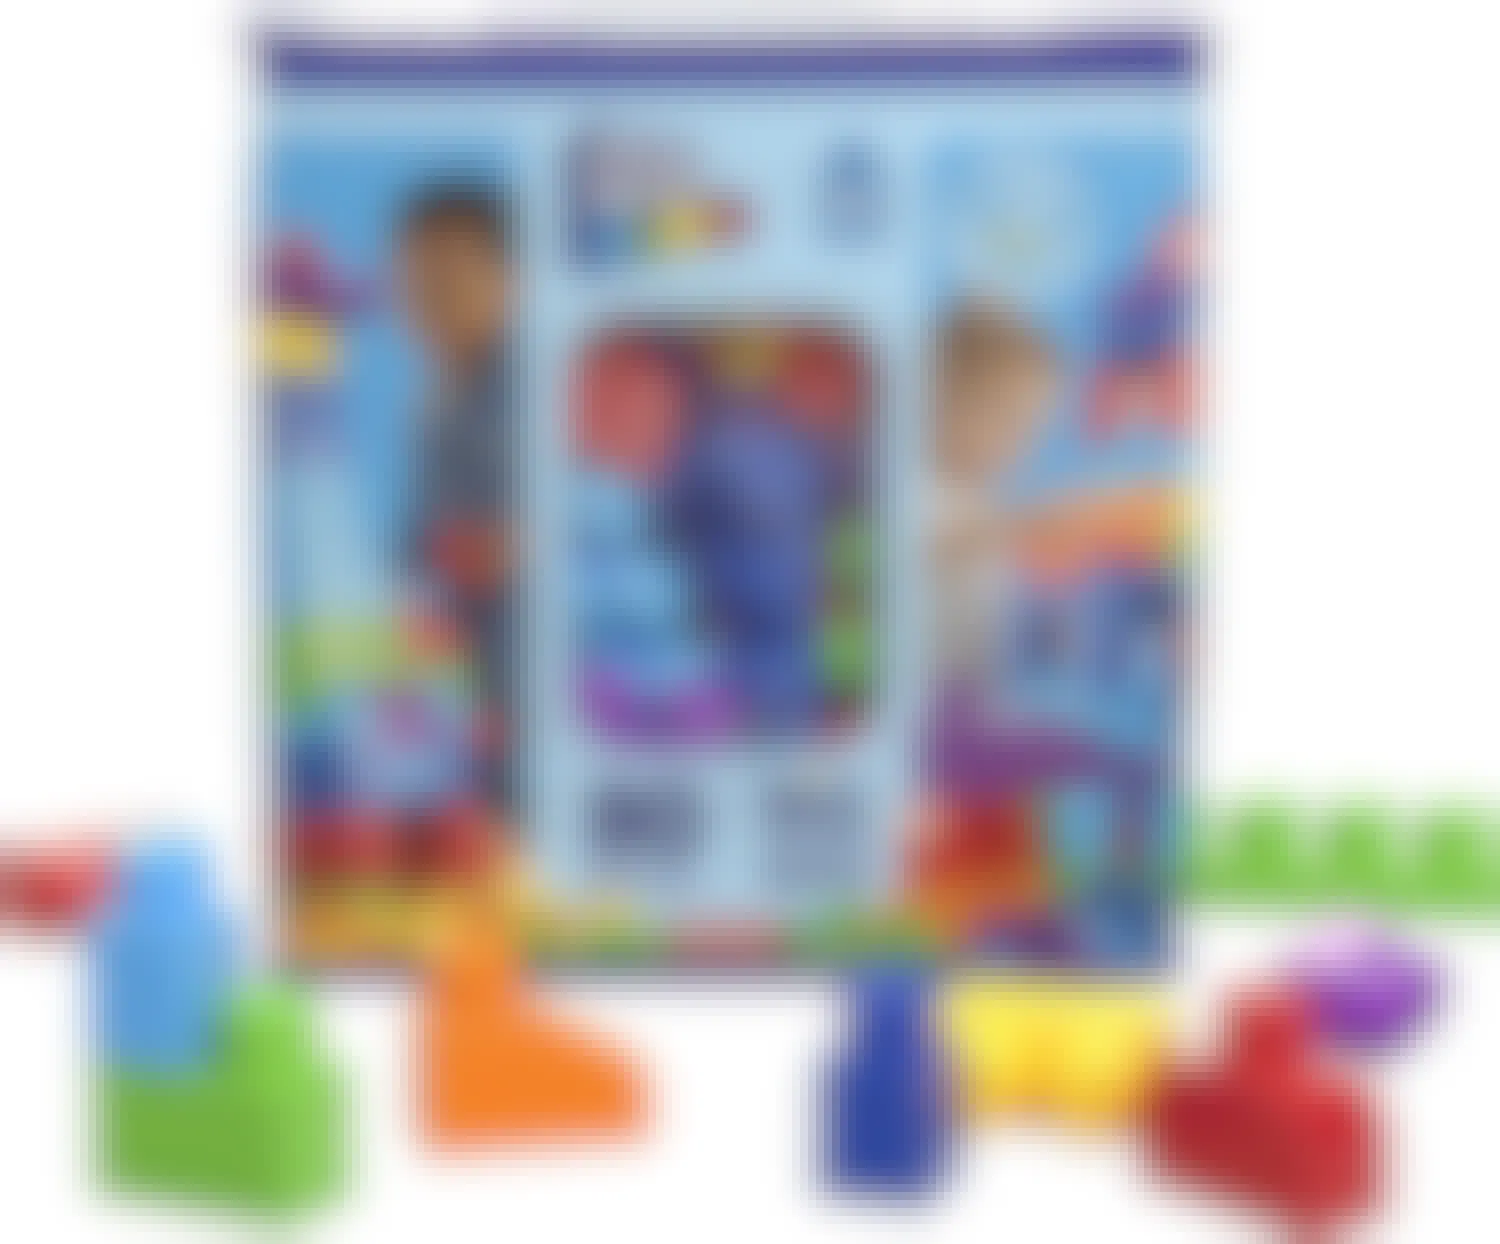 An 80 piece Mega Bloks Big Building Bag and some colorful blocks on a white background.